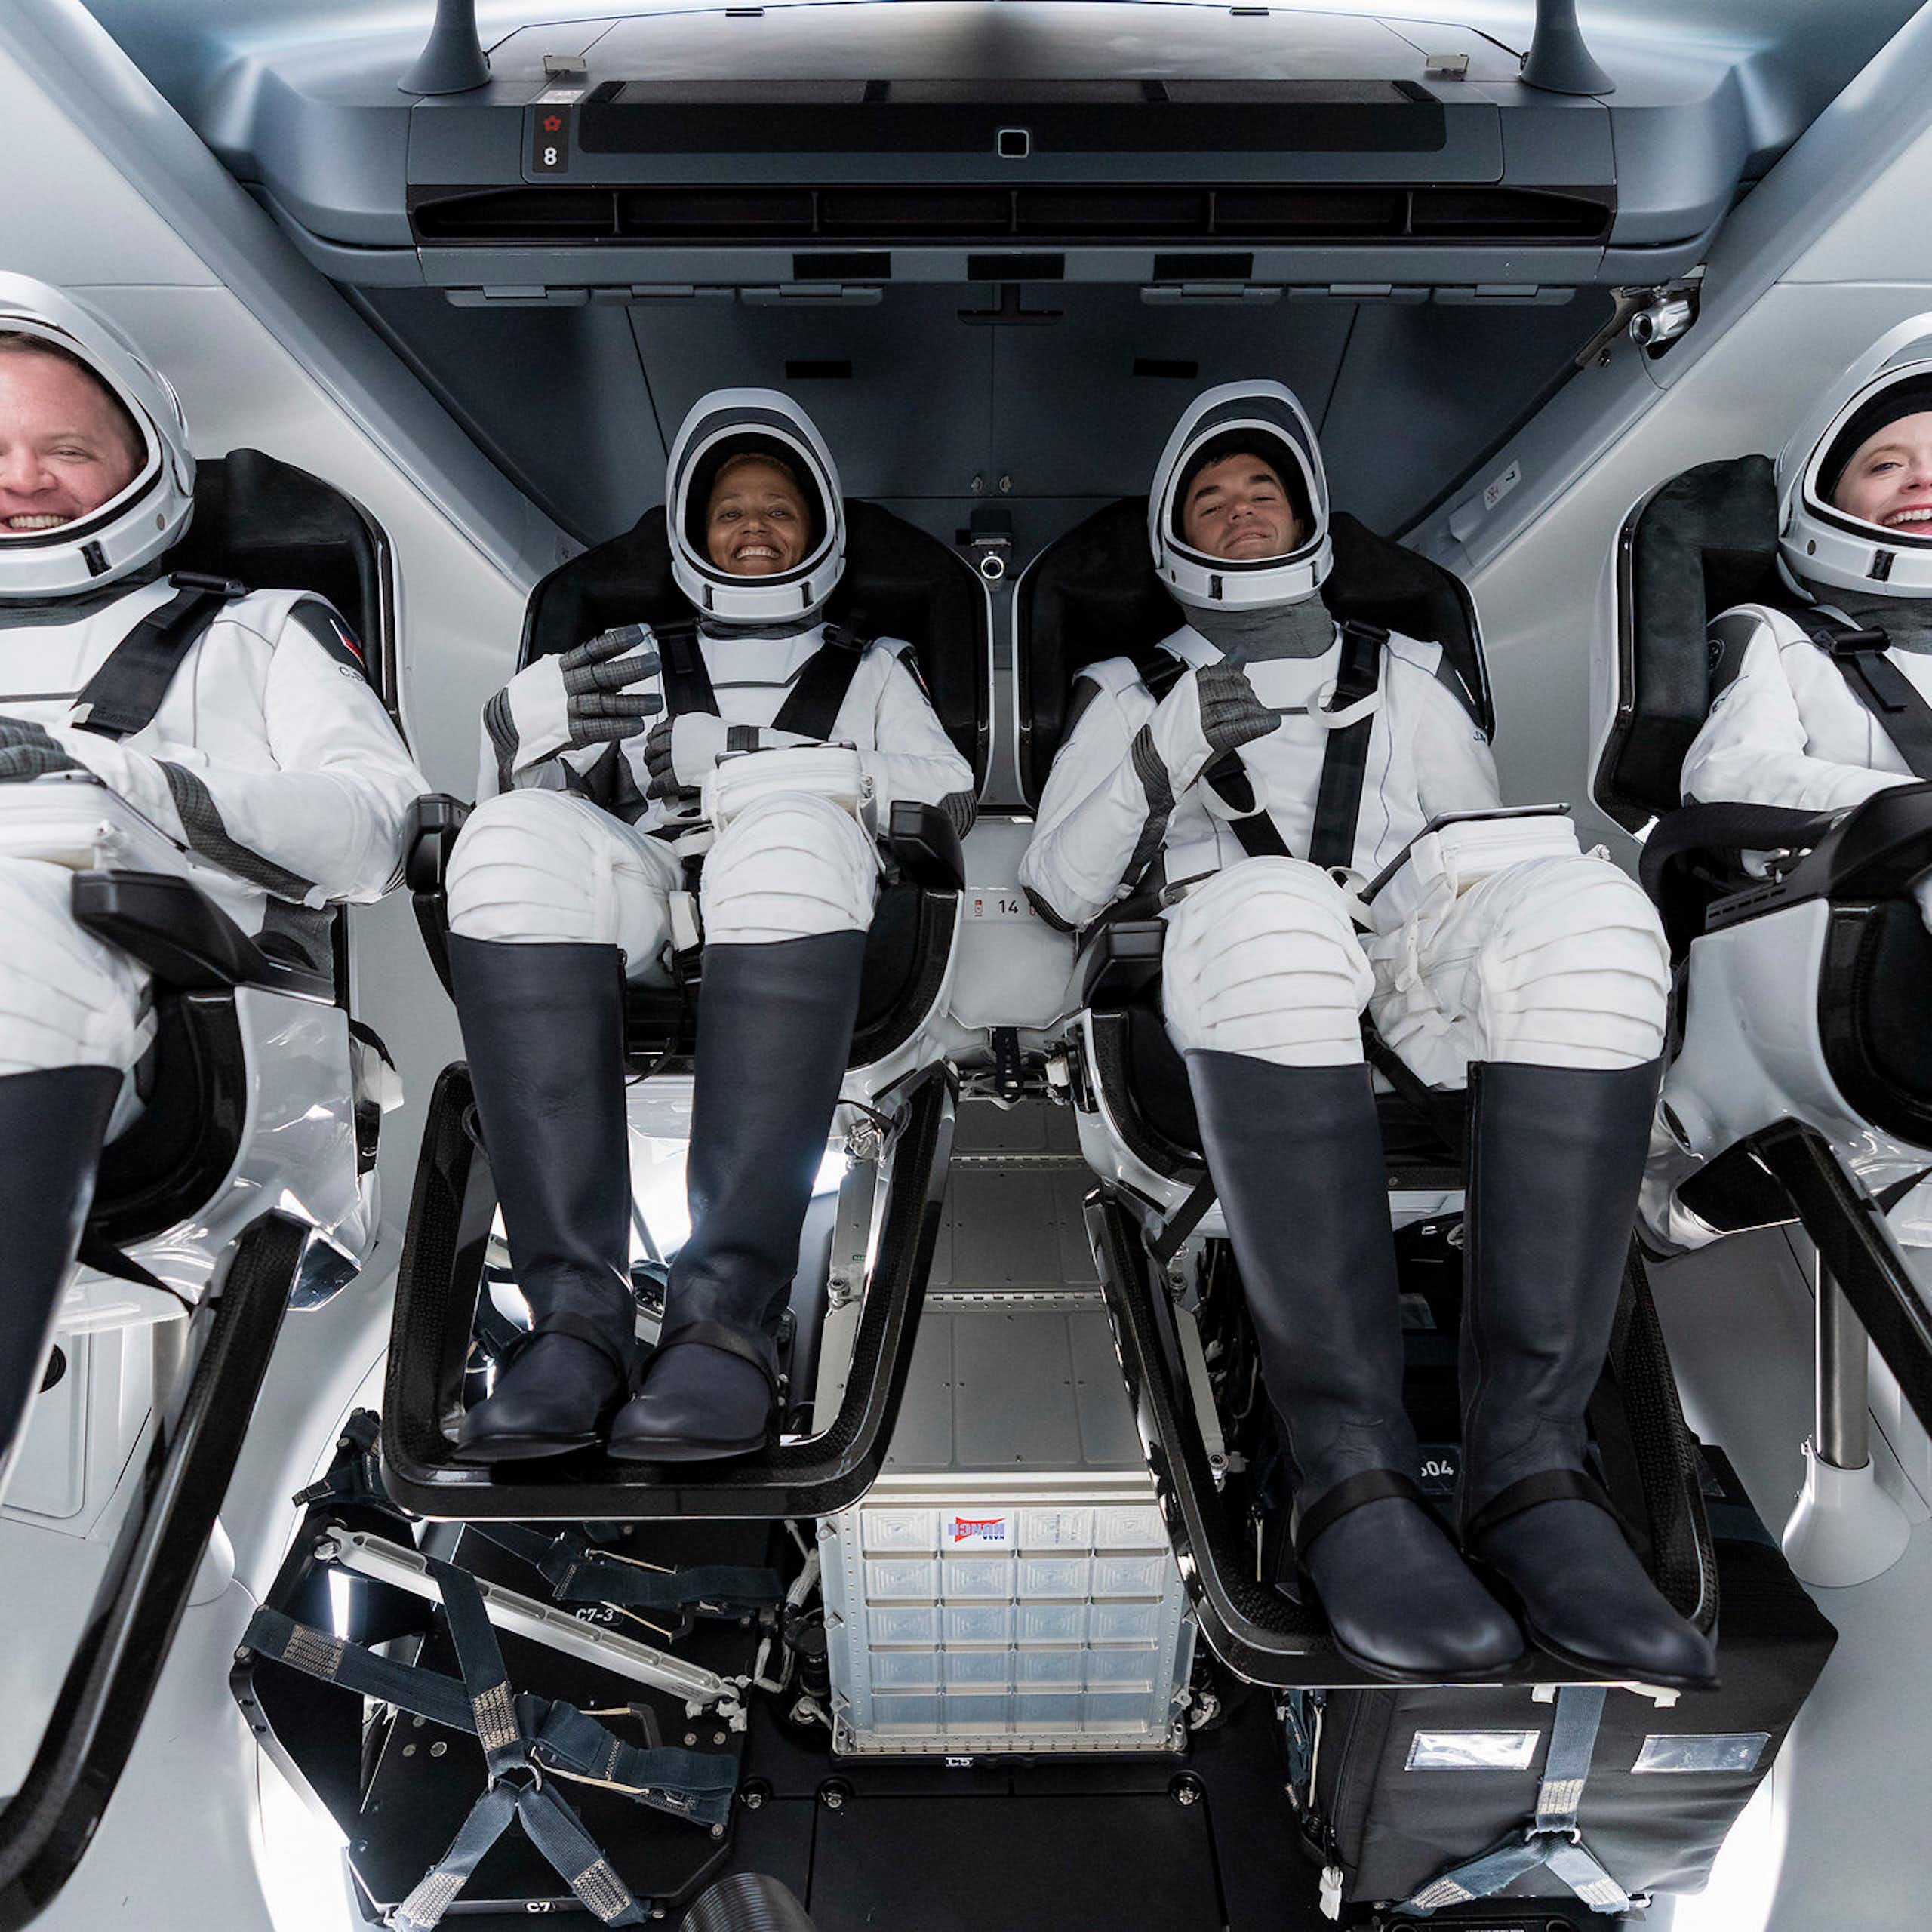 Four smiling people wearing white space suits.